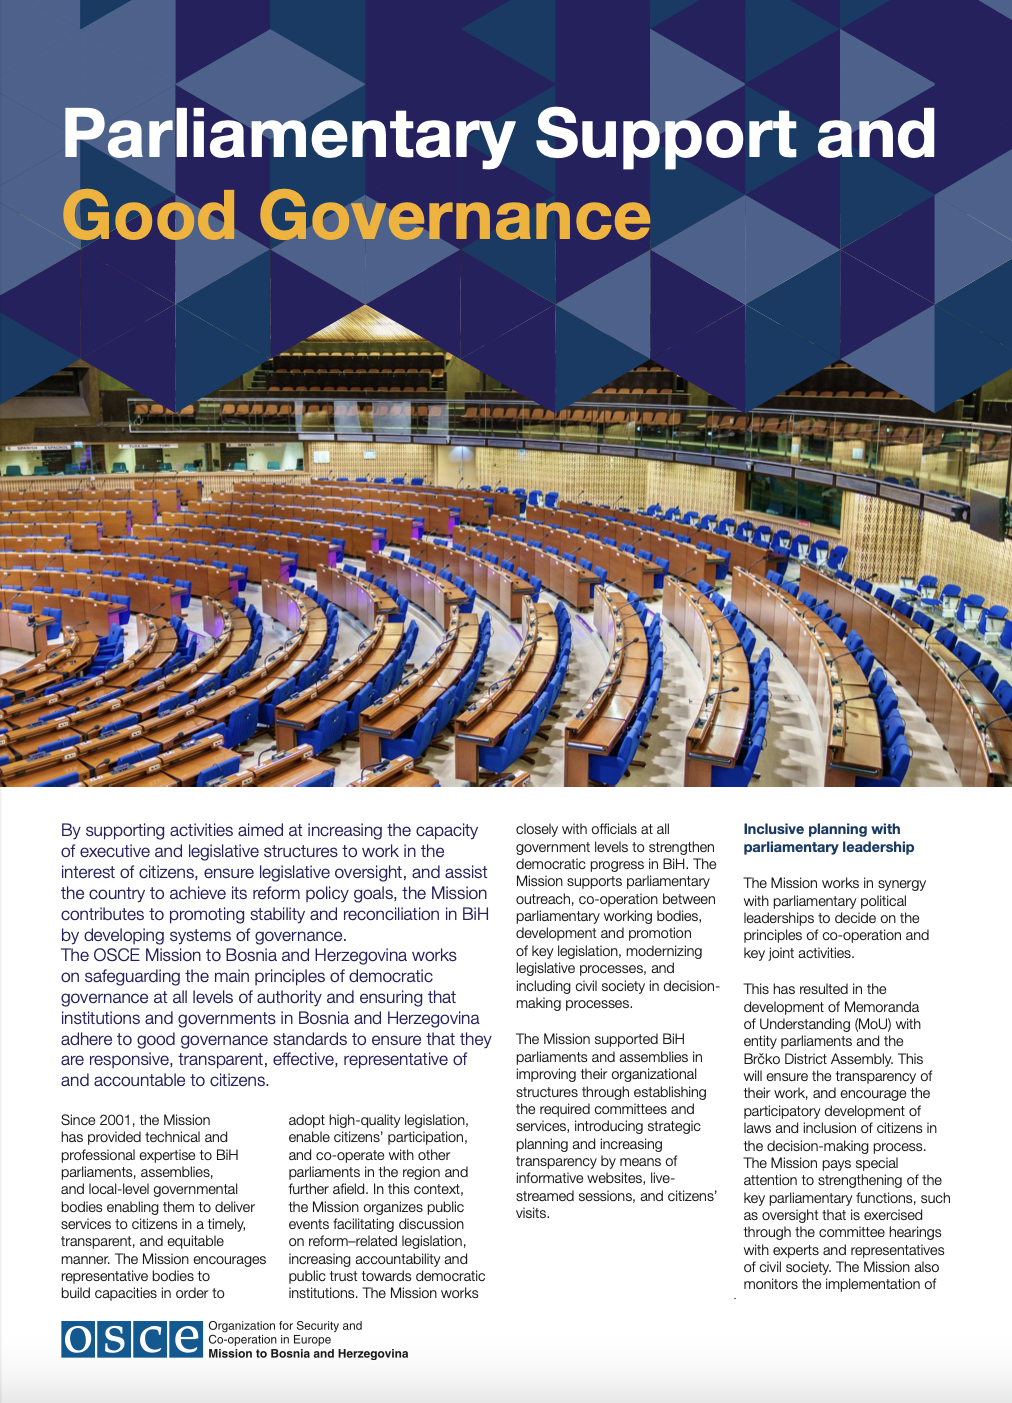 Parliamentary Support and Good Governance